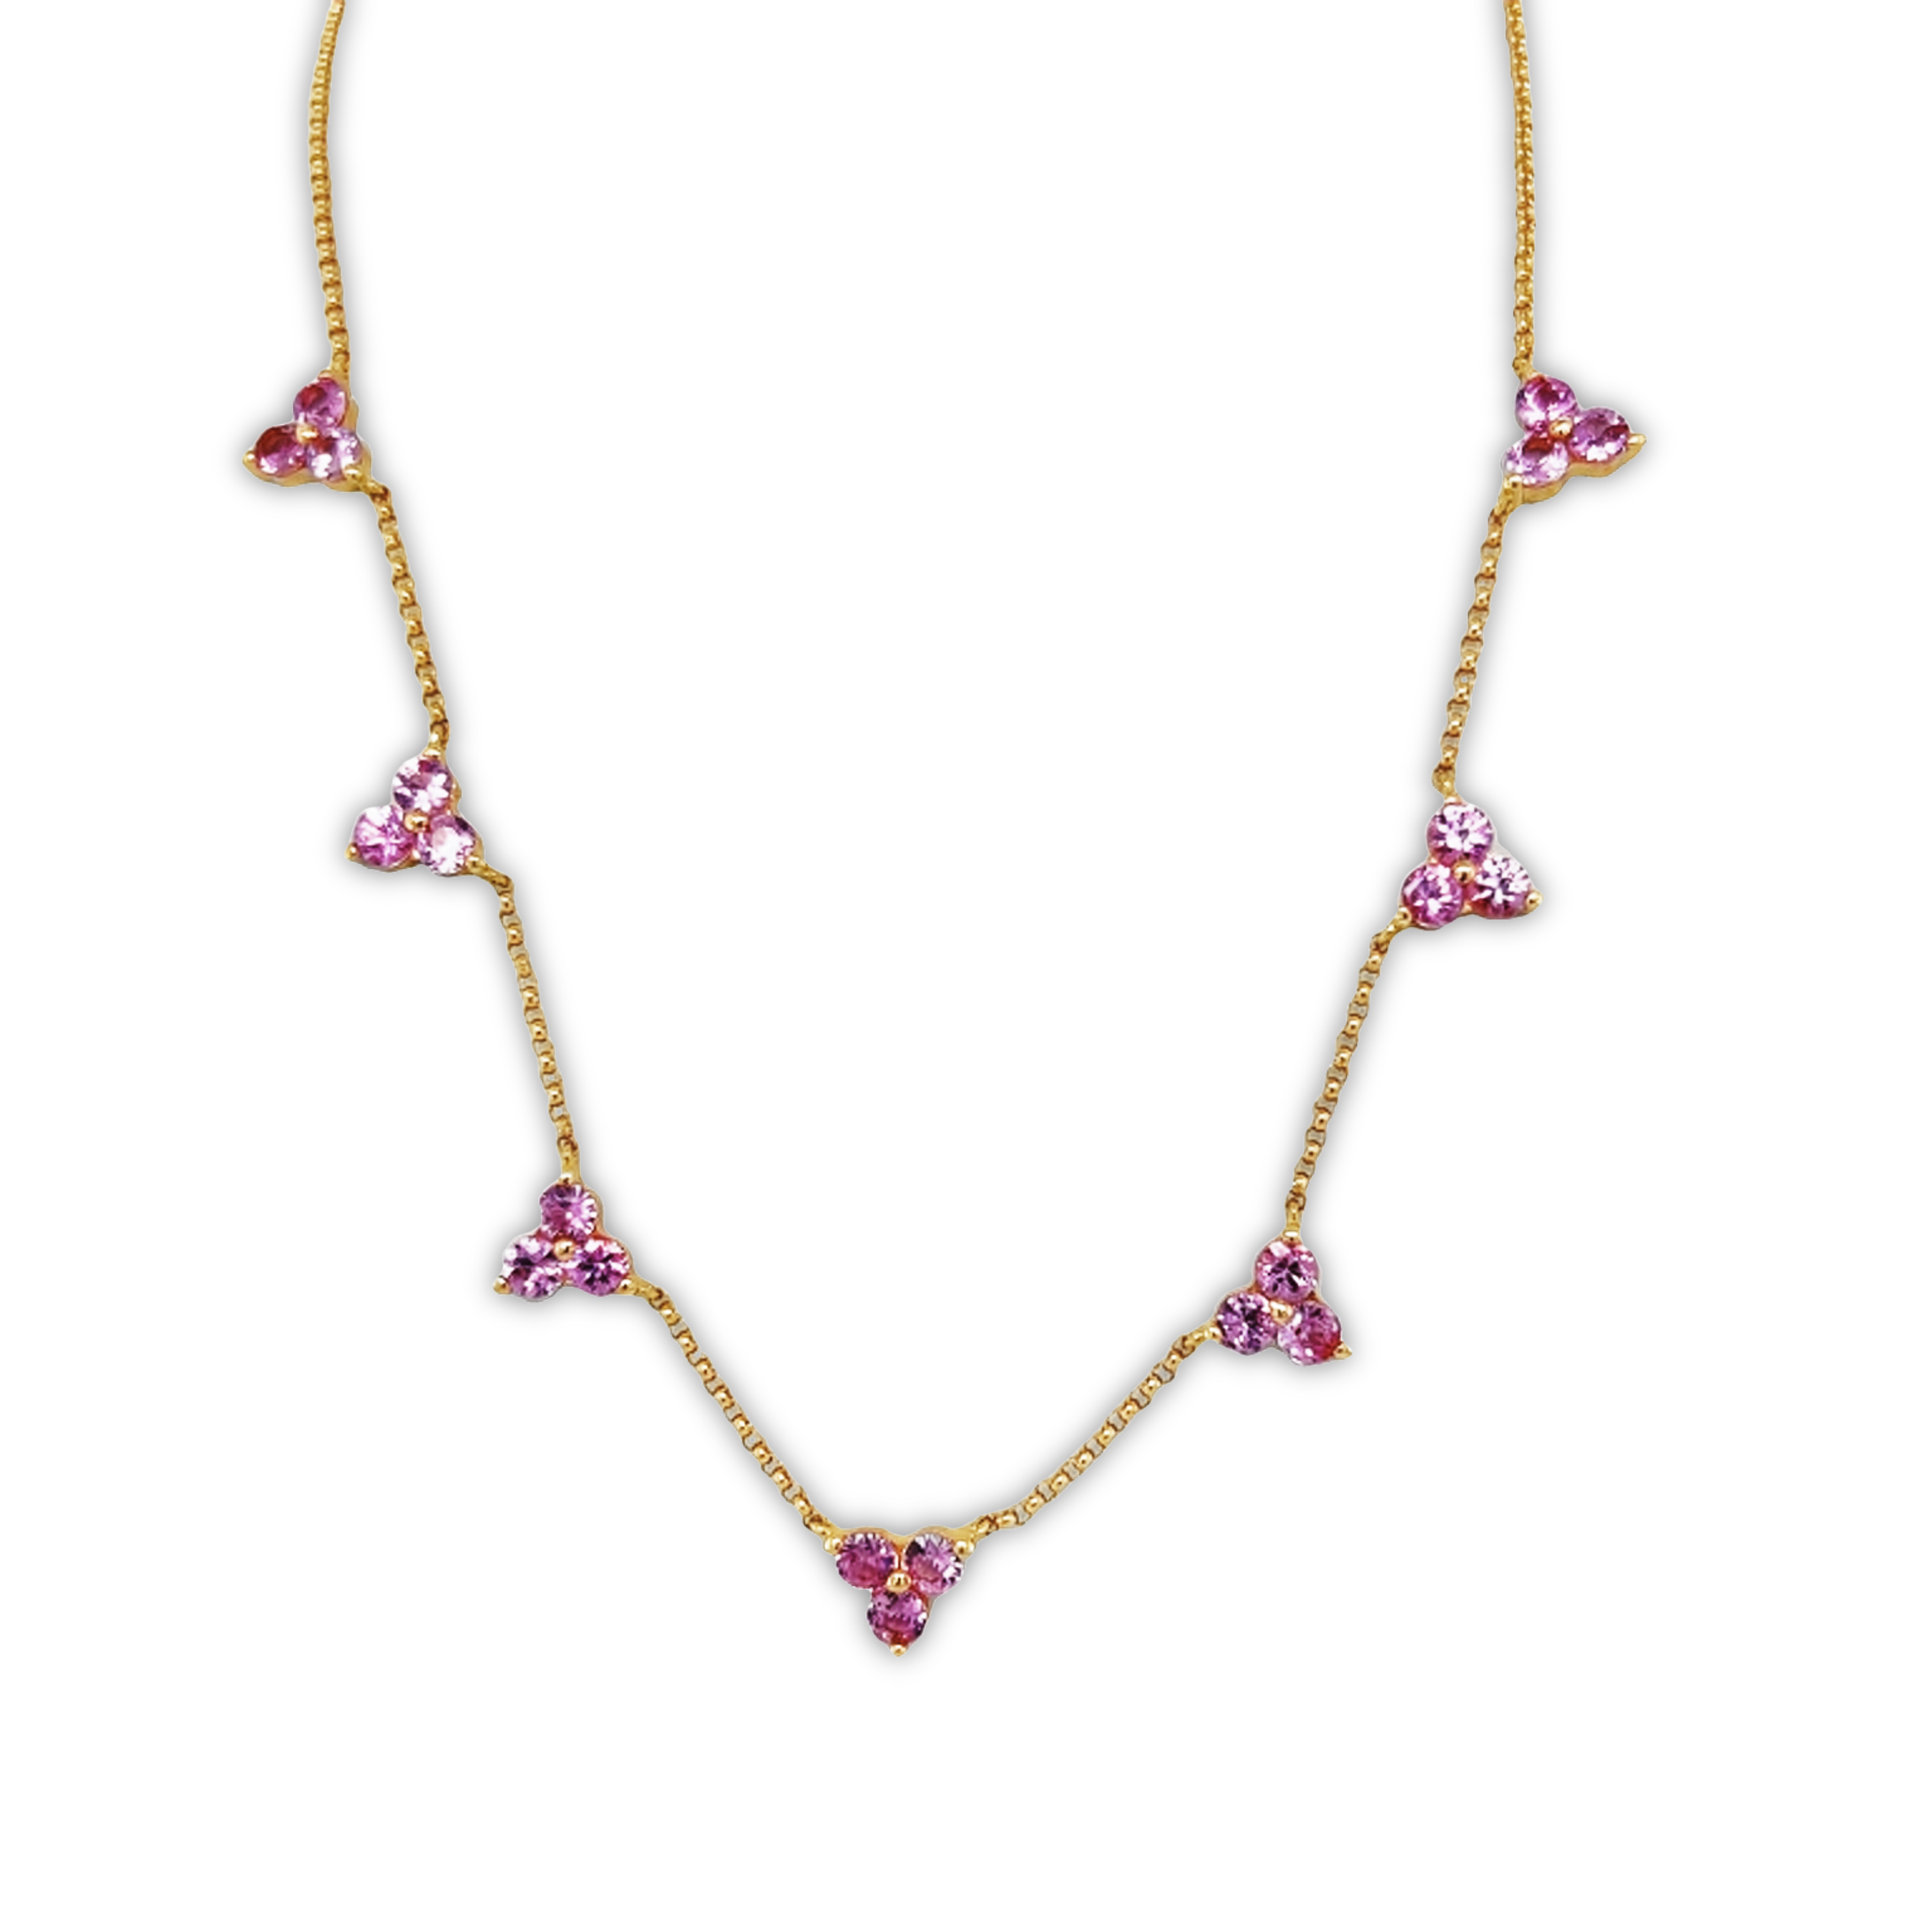 Featured image for “7  Station Pink Sapphire Triangle Necklace”